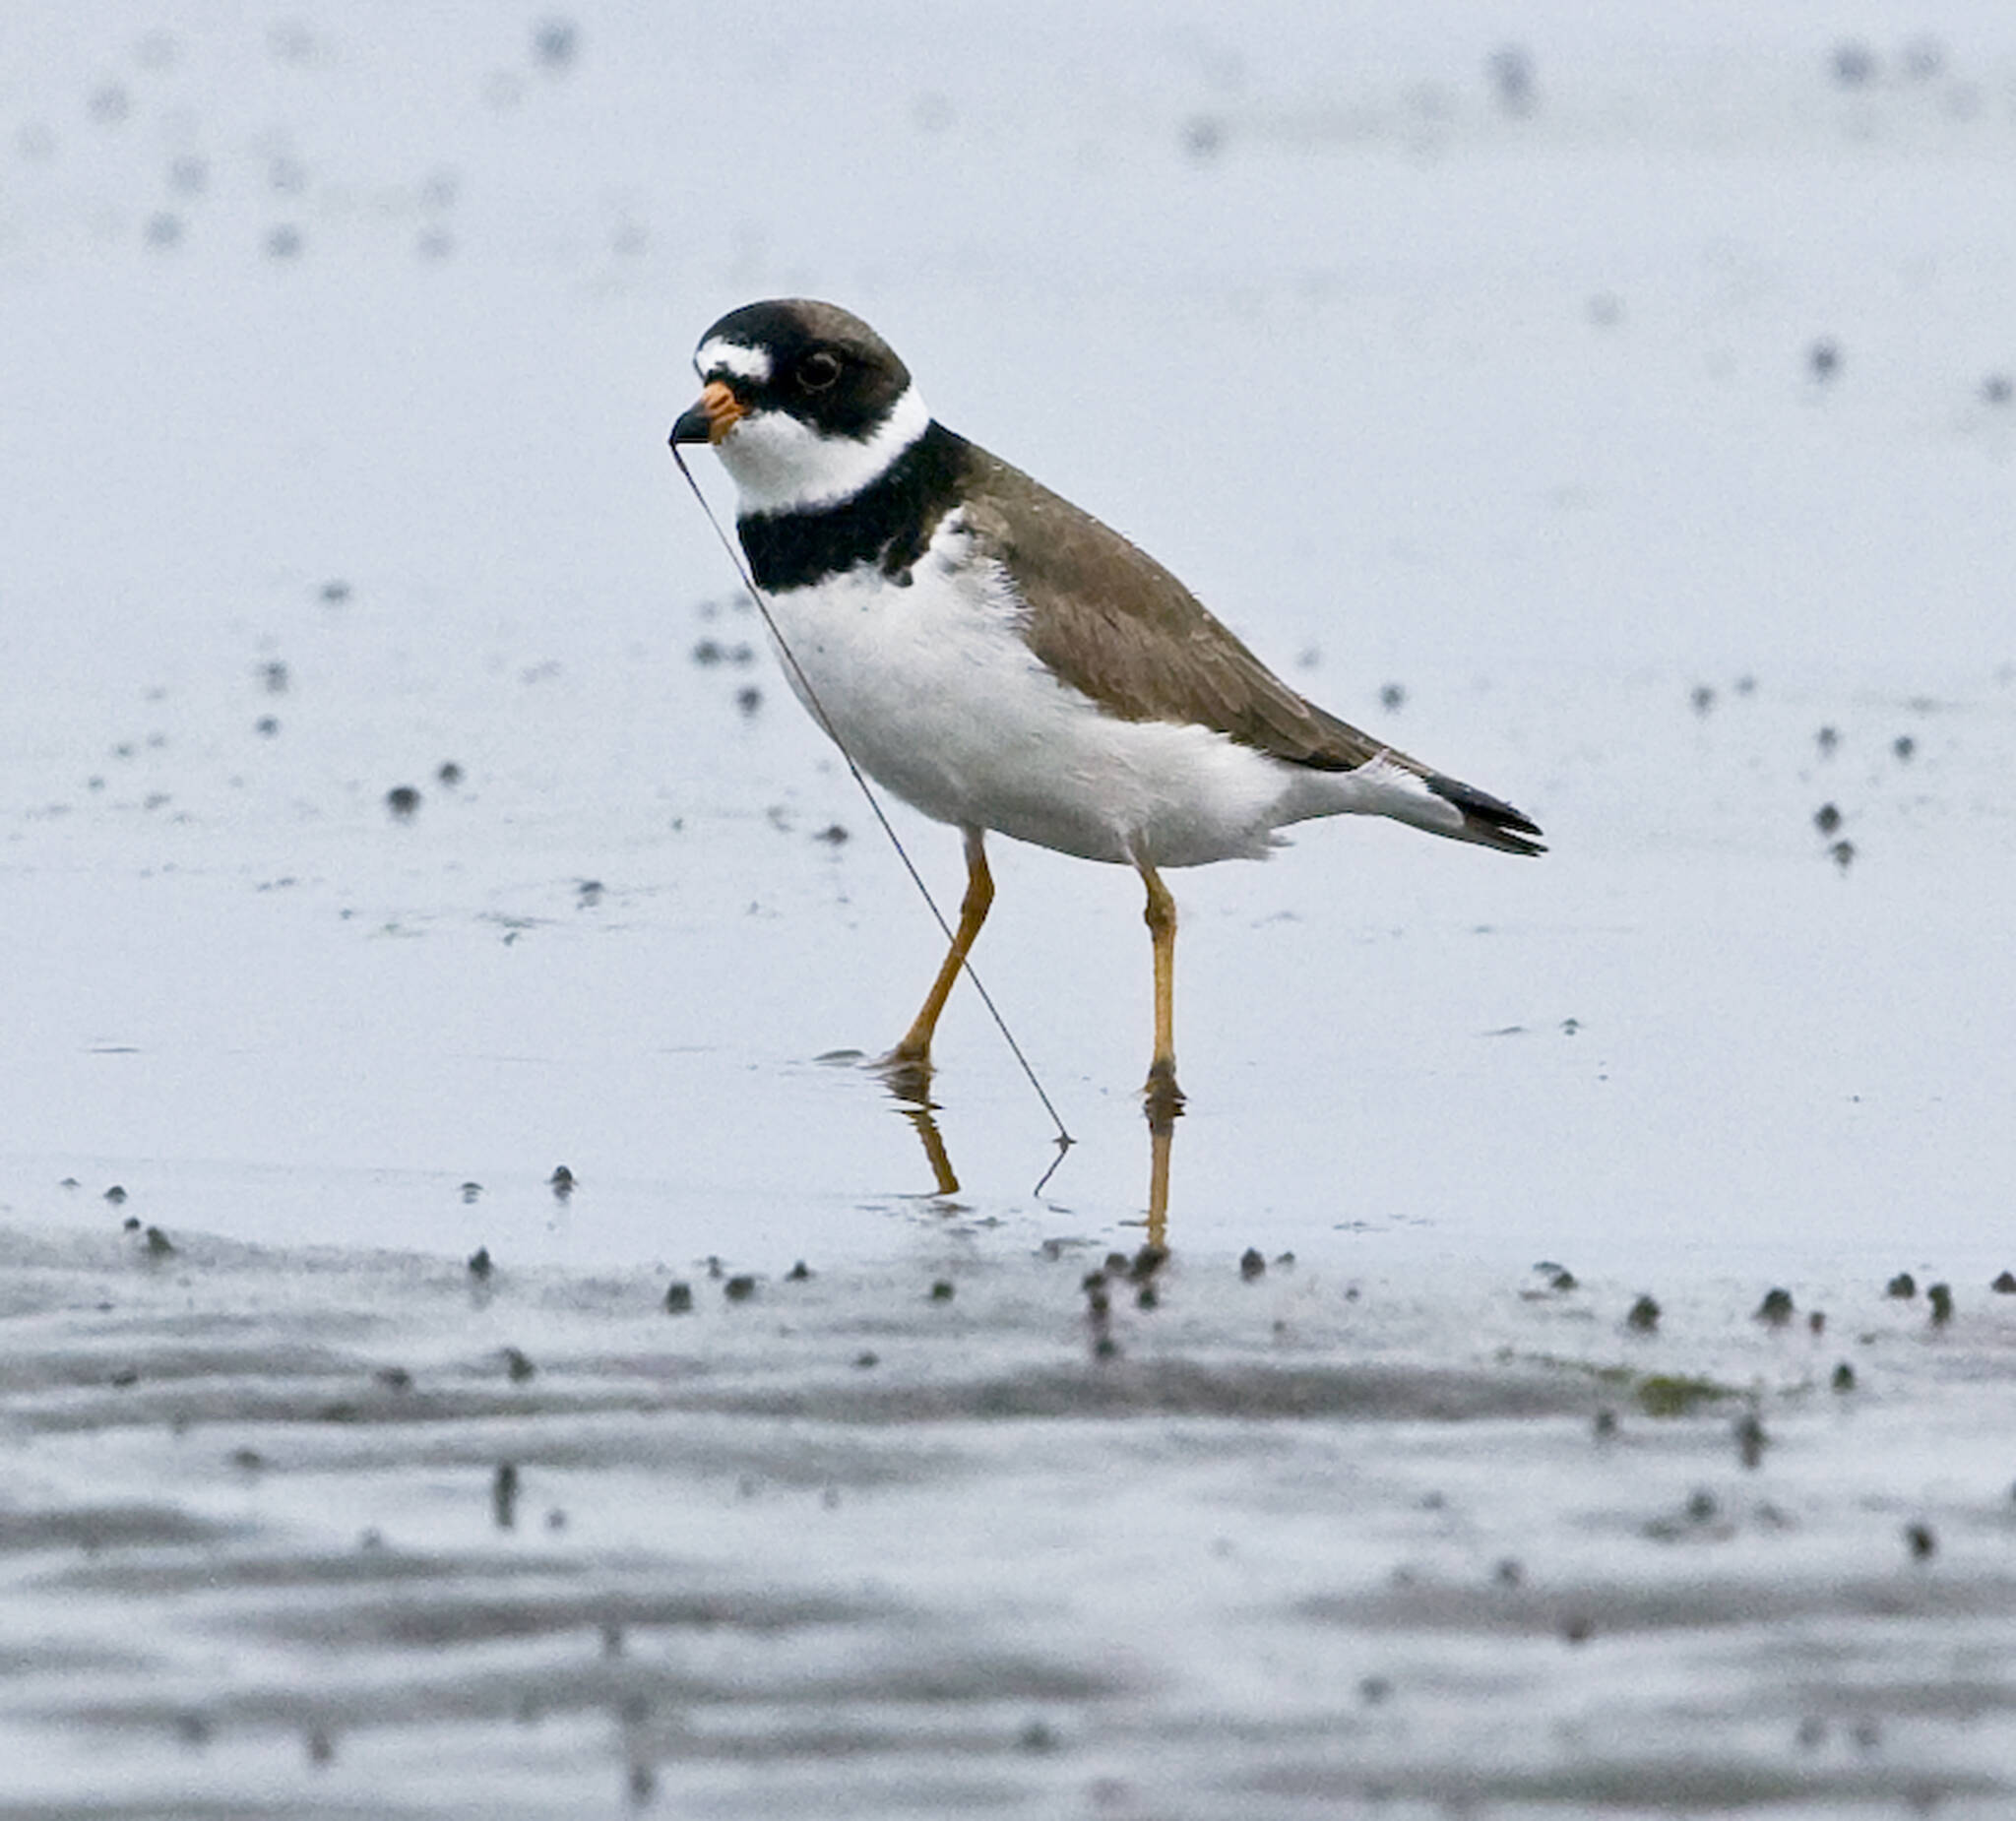 Courtesy photo / Jan Wieser
A semi-palamated plover alights on the mud at the Grays Harbor National Wildlife Refuge during the Grays Harbor Shorebird and Nature Festival.